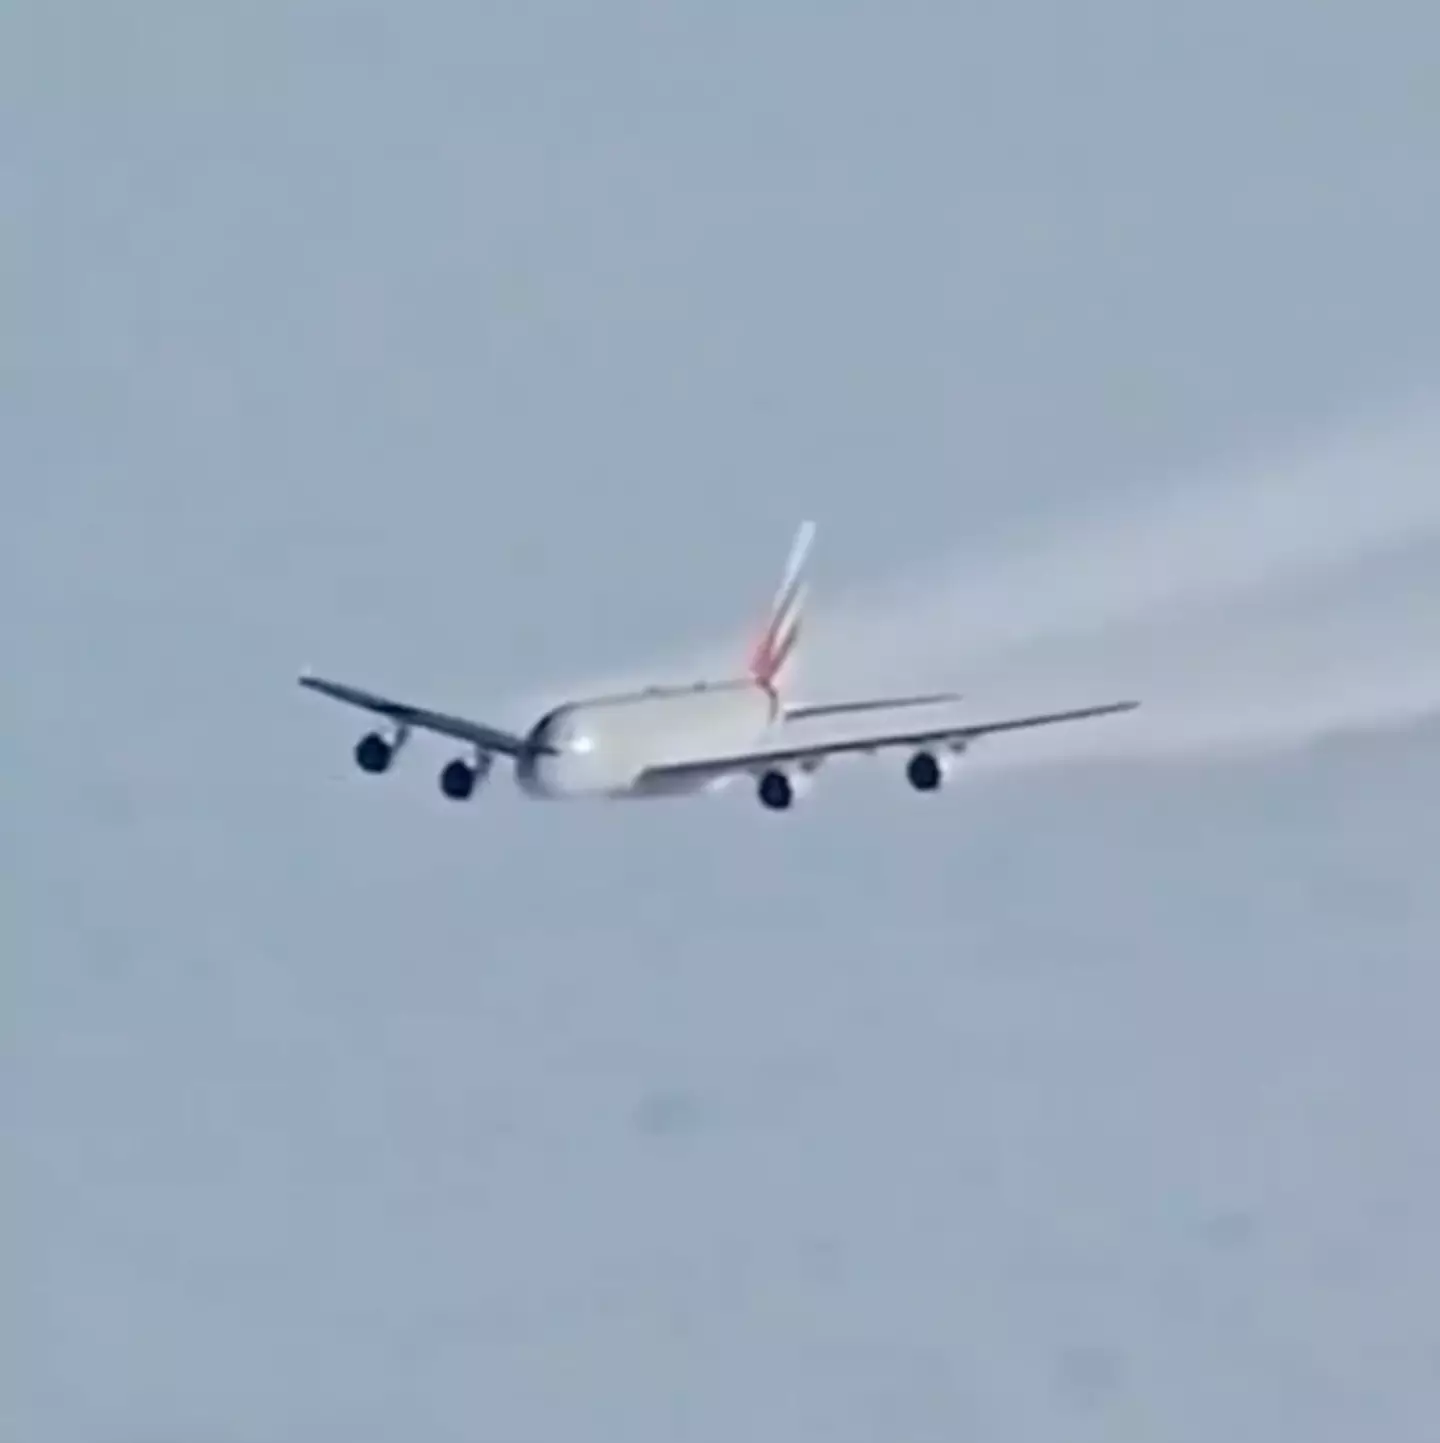 Insane video gives perspective on how fast planes actually fly